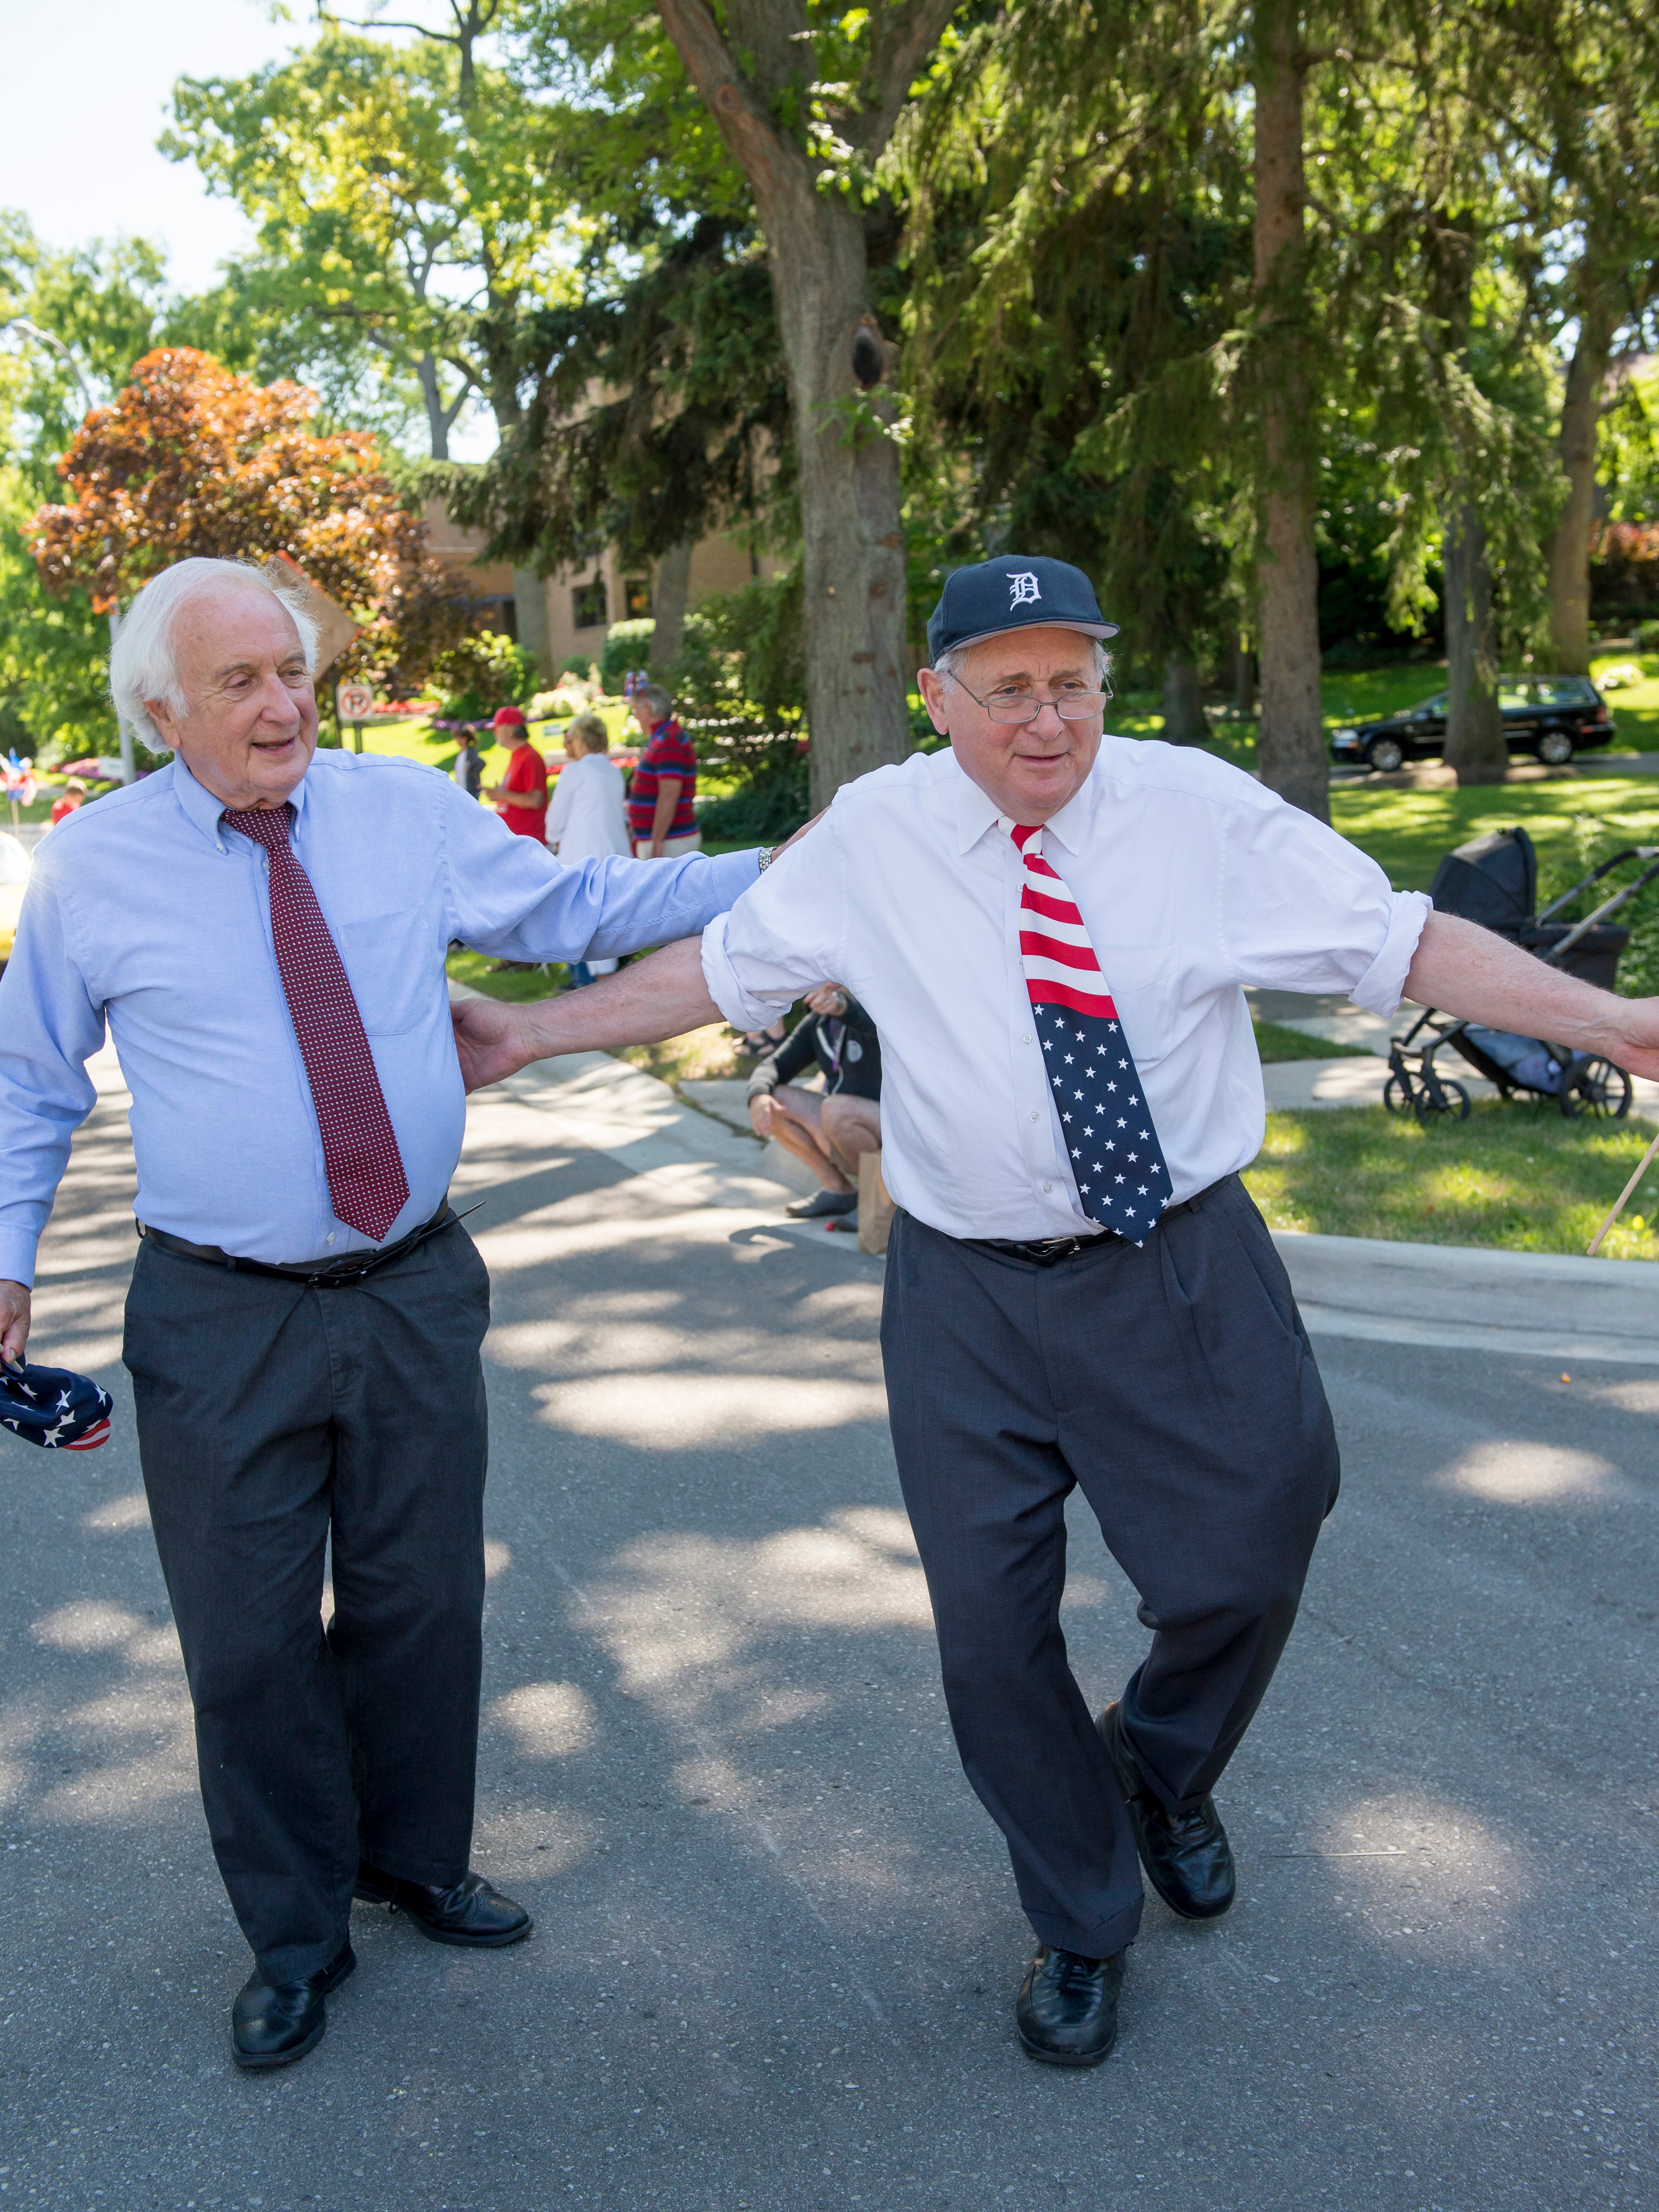 U.S. Rep.Sander Levin, left, and U.S. Sen. Carl Levin walk during the 2014 Huntington Woods 4th of July Parade.